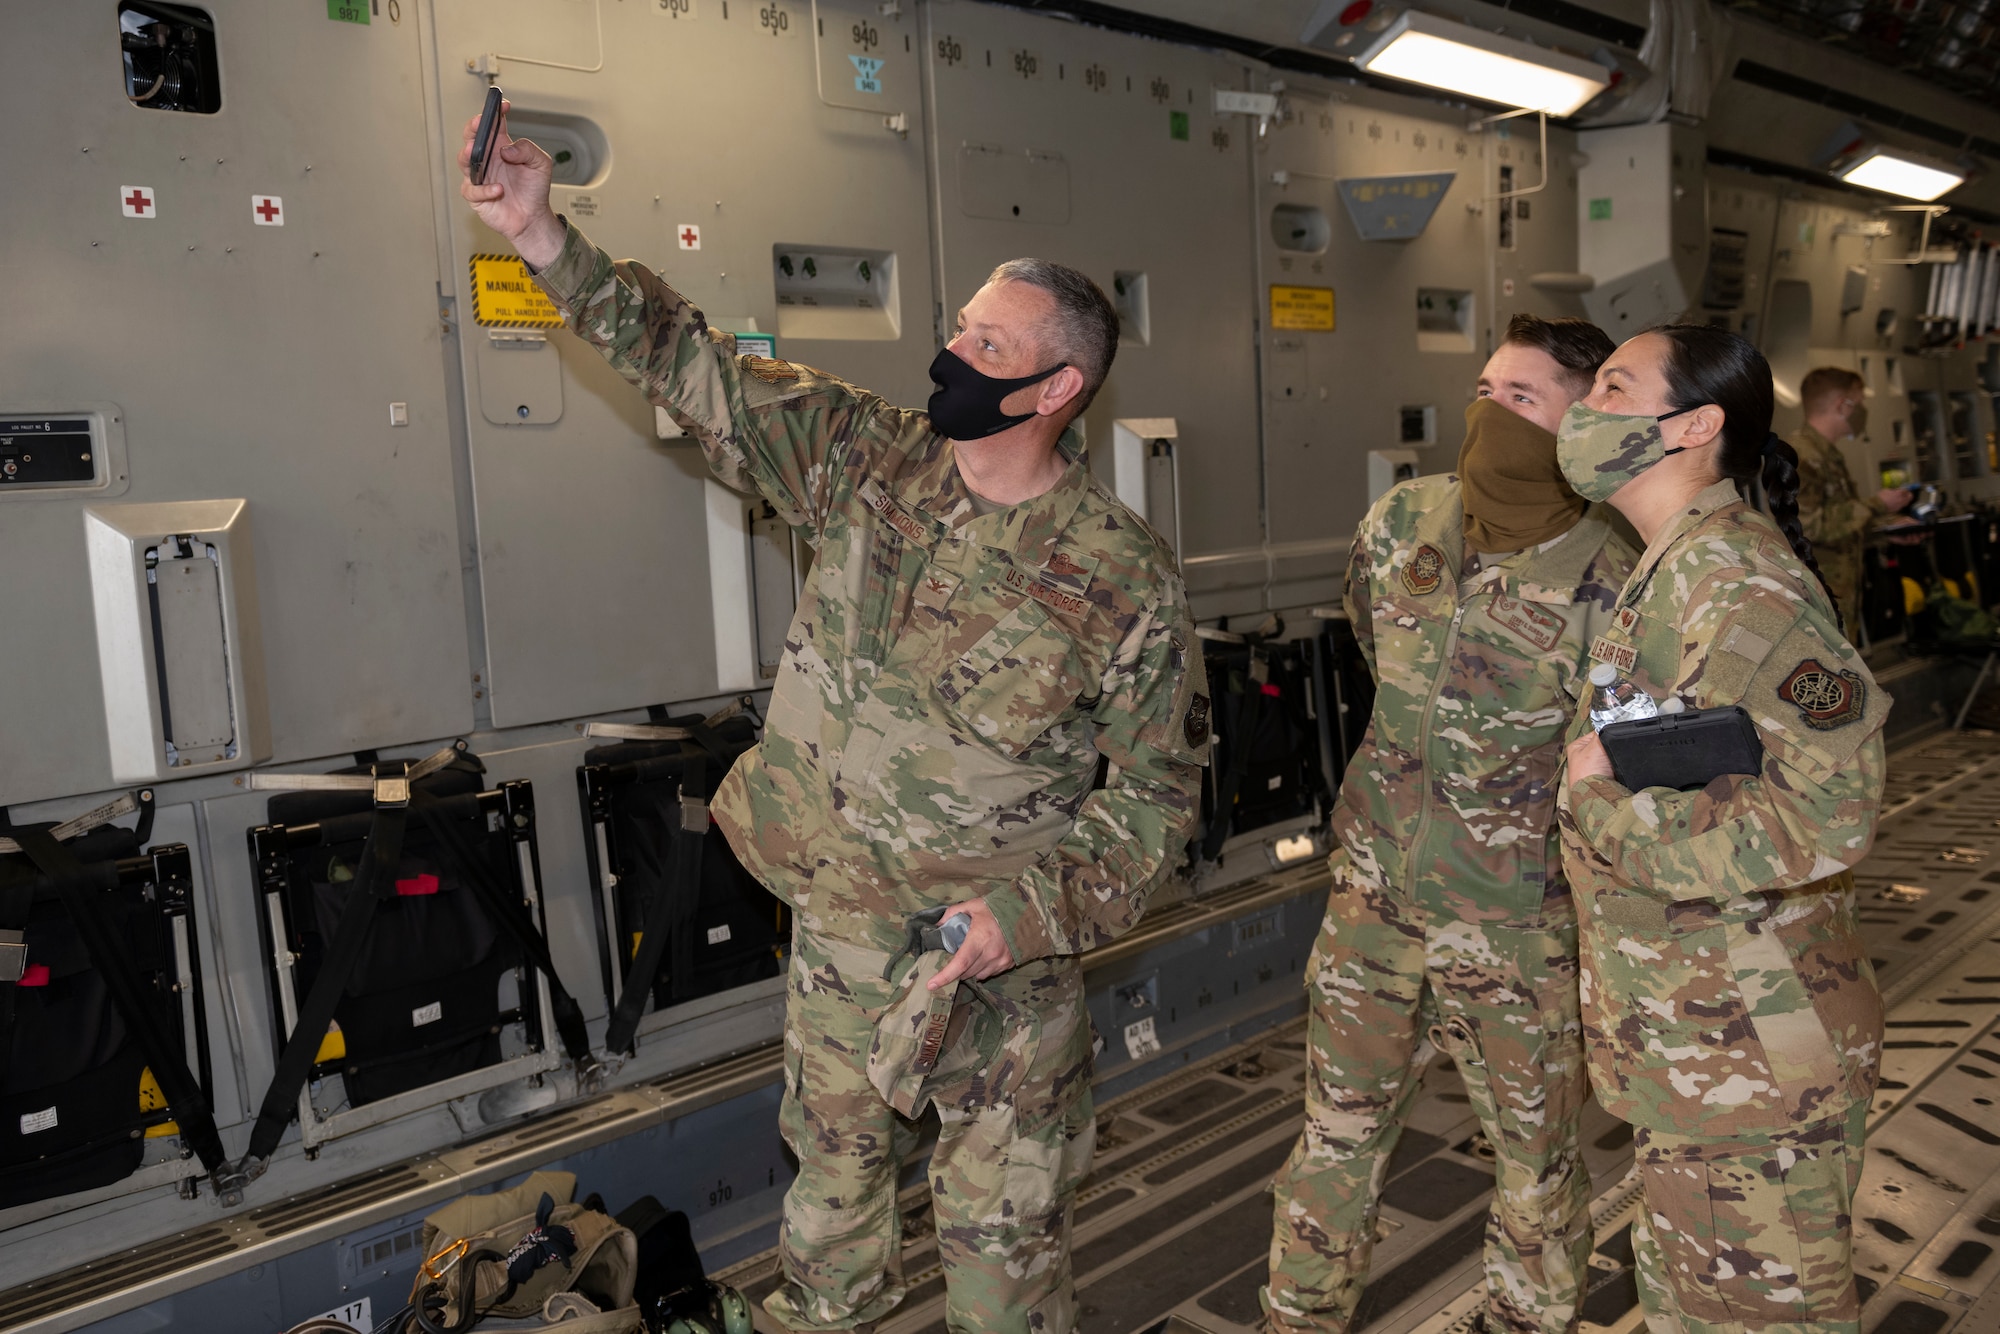 U.S. Air Force Col. Corey Simmons, left, 60th Air Mobility Wing commander, takes a selfie with Staff Sgt. Terry Durbin, center, 60th Aeromedical Evacuation Squadron unit training manager, and Capt. Erika Allen, 60th Aeromedical Evacuation Squadron flight examiner, during Leadership Rounds March 19, 2021, at Travis Air Force Base, California. The Leadership Rounds program provides 60th AMW leadership an opportunity to interact with Airmen and receive a detailed view of each mission performed at Travis AFB. (U.S. Air Force photo by Senior Airman Cameron Otte)